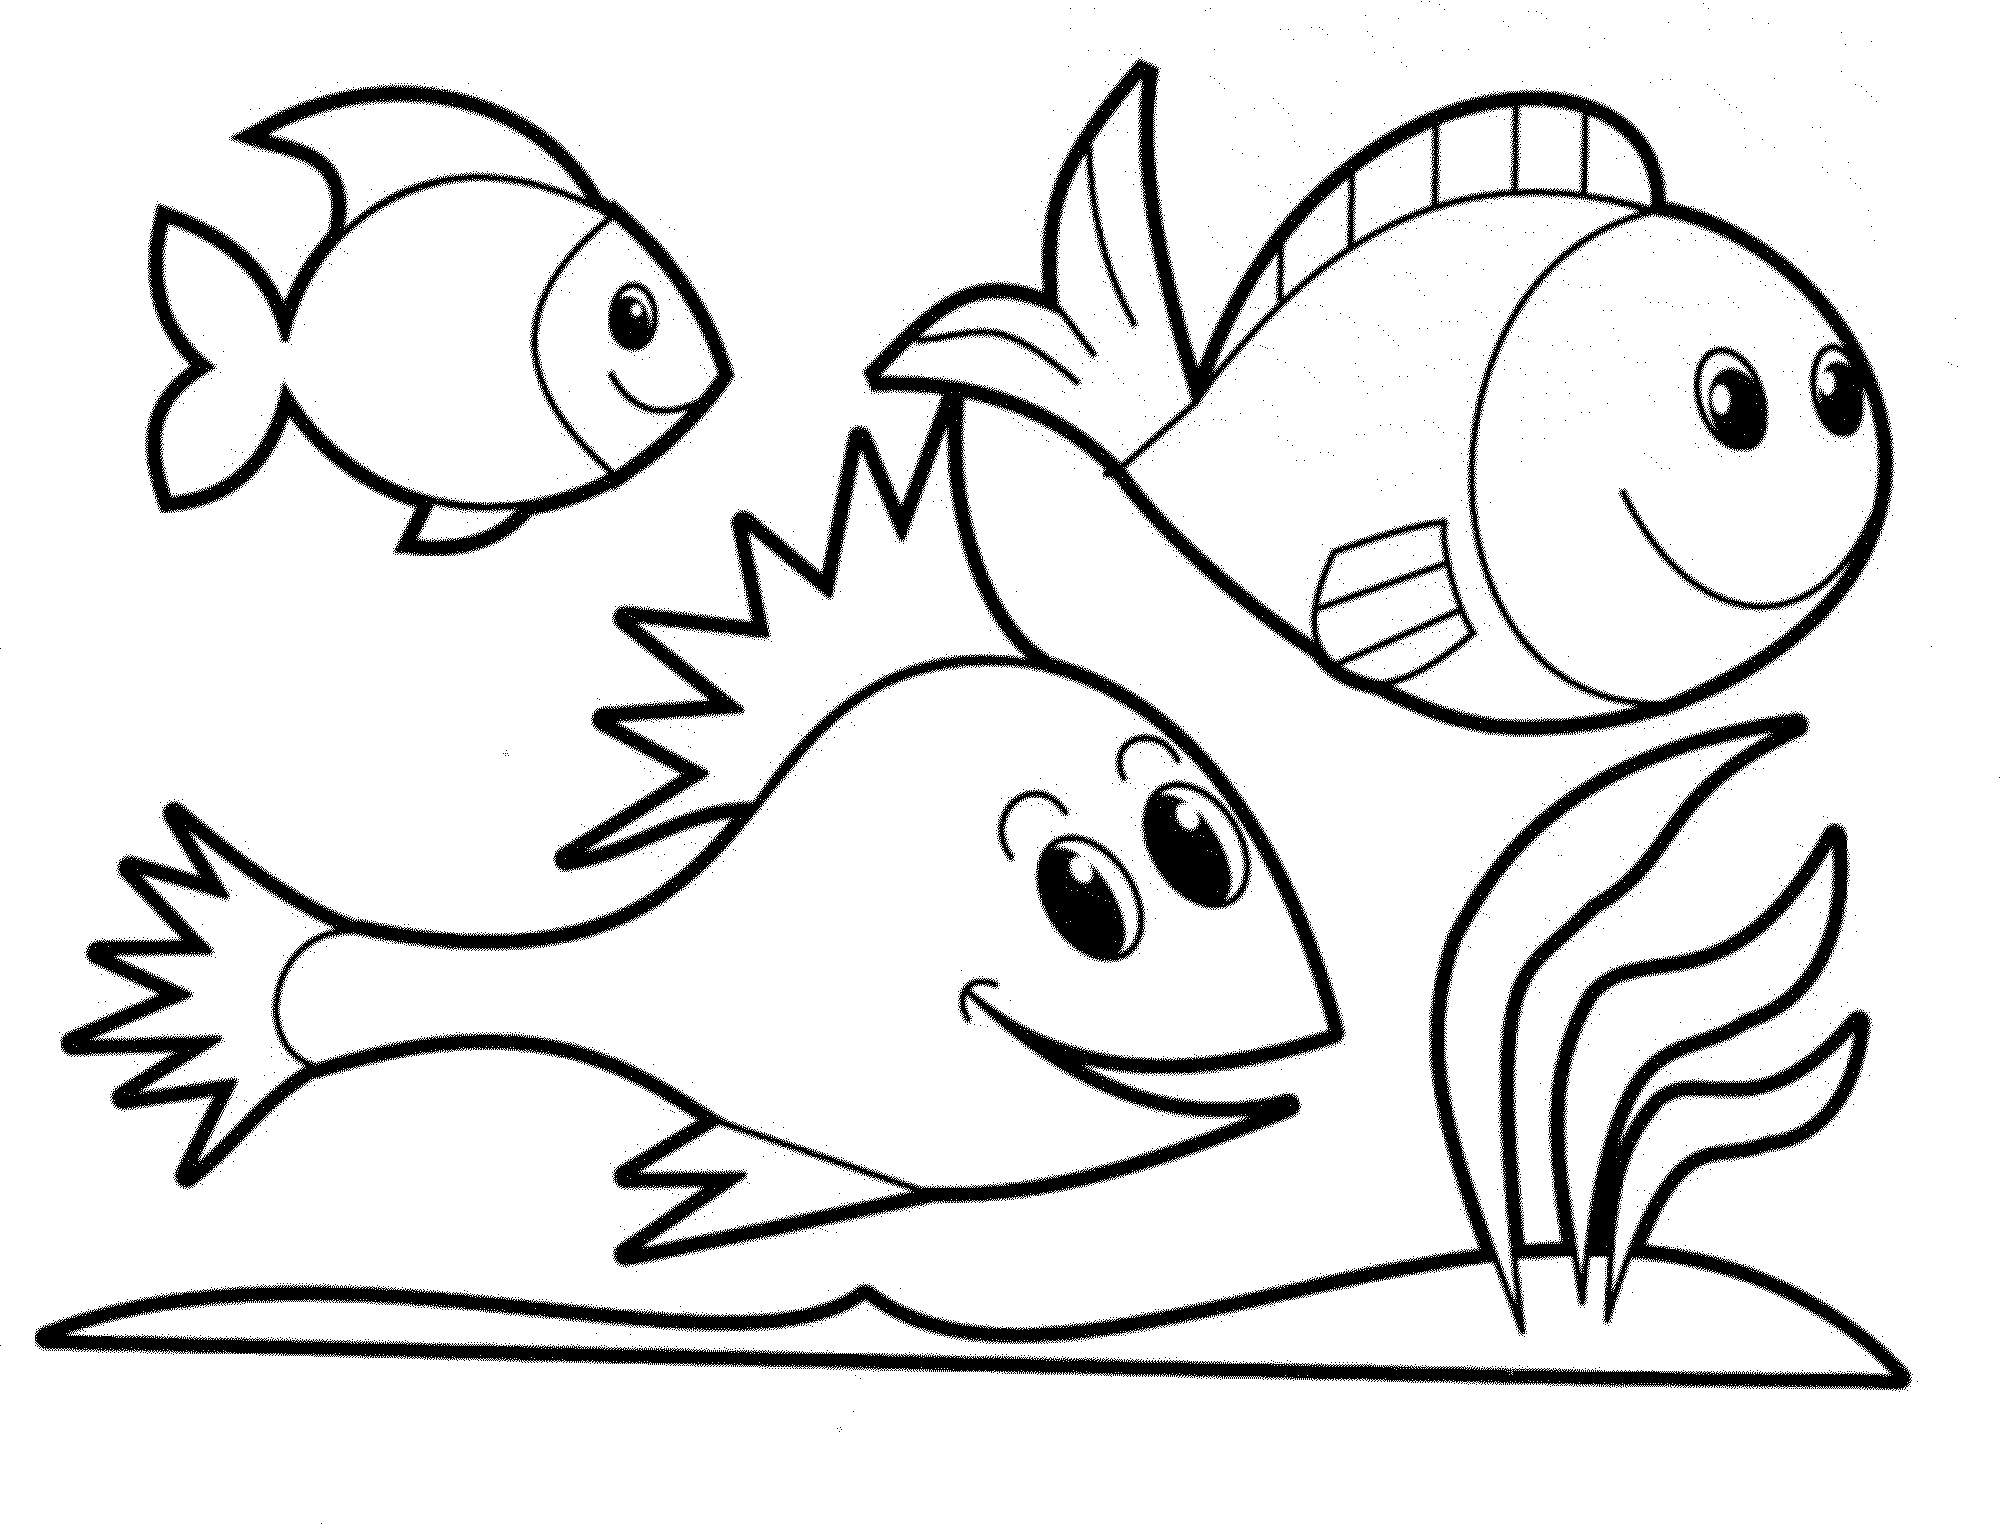 Coloring Pages Fishing Coloring Sheets Cartoon Fish Coloring Pages Elegant Pic Of Built